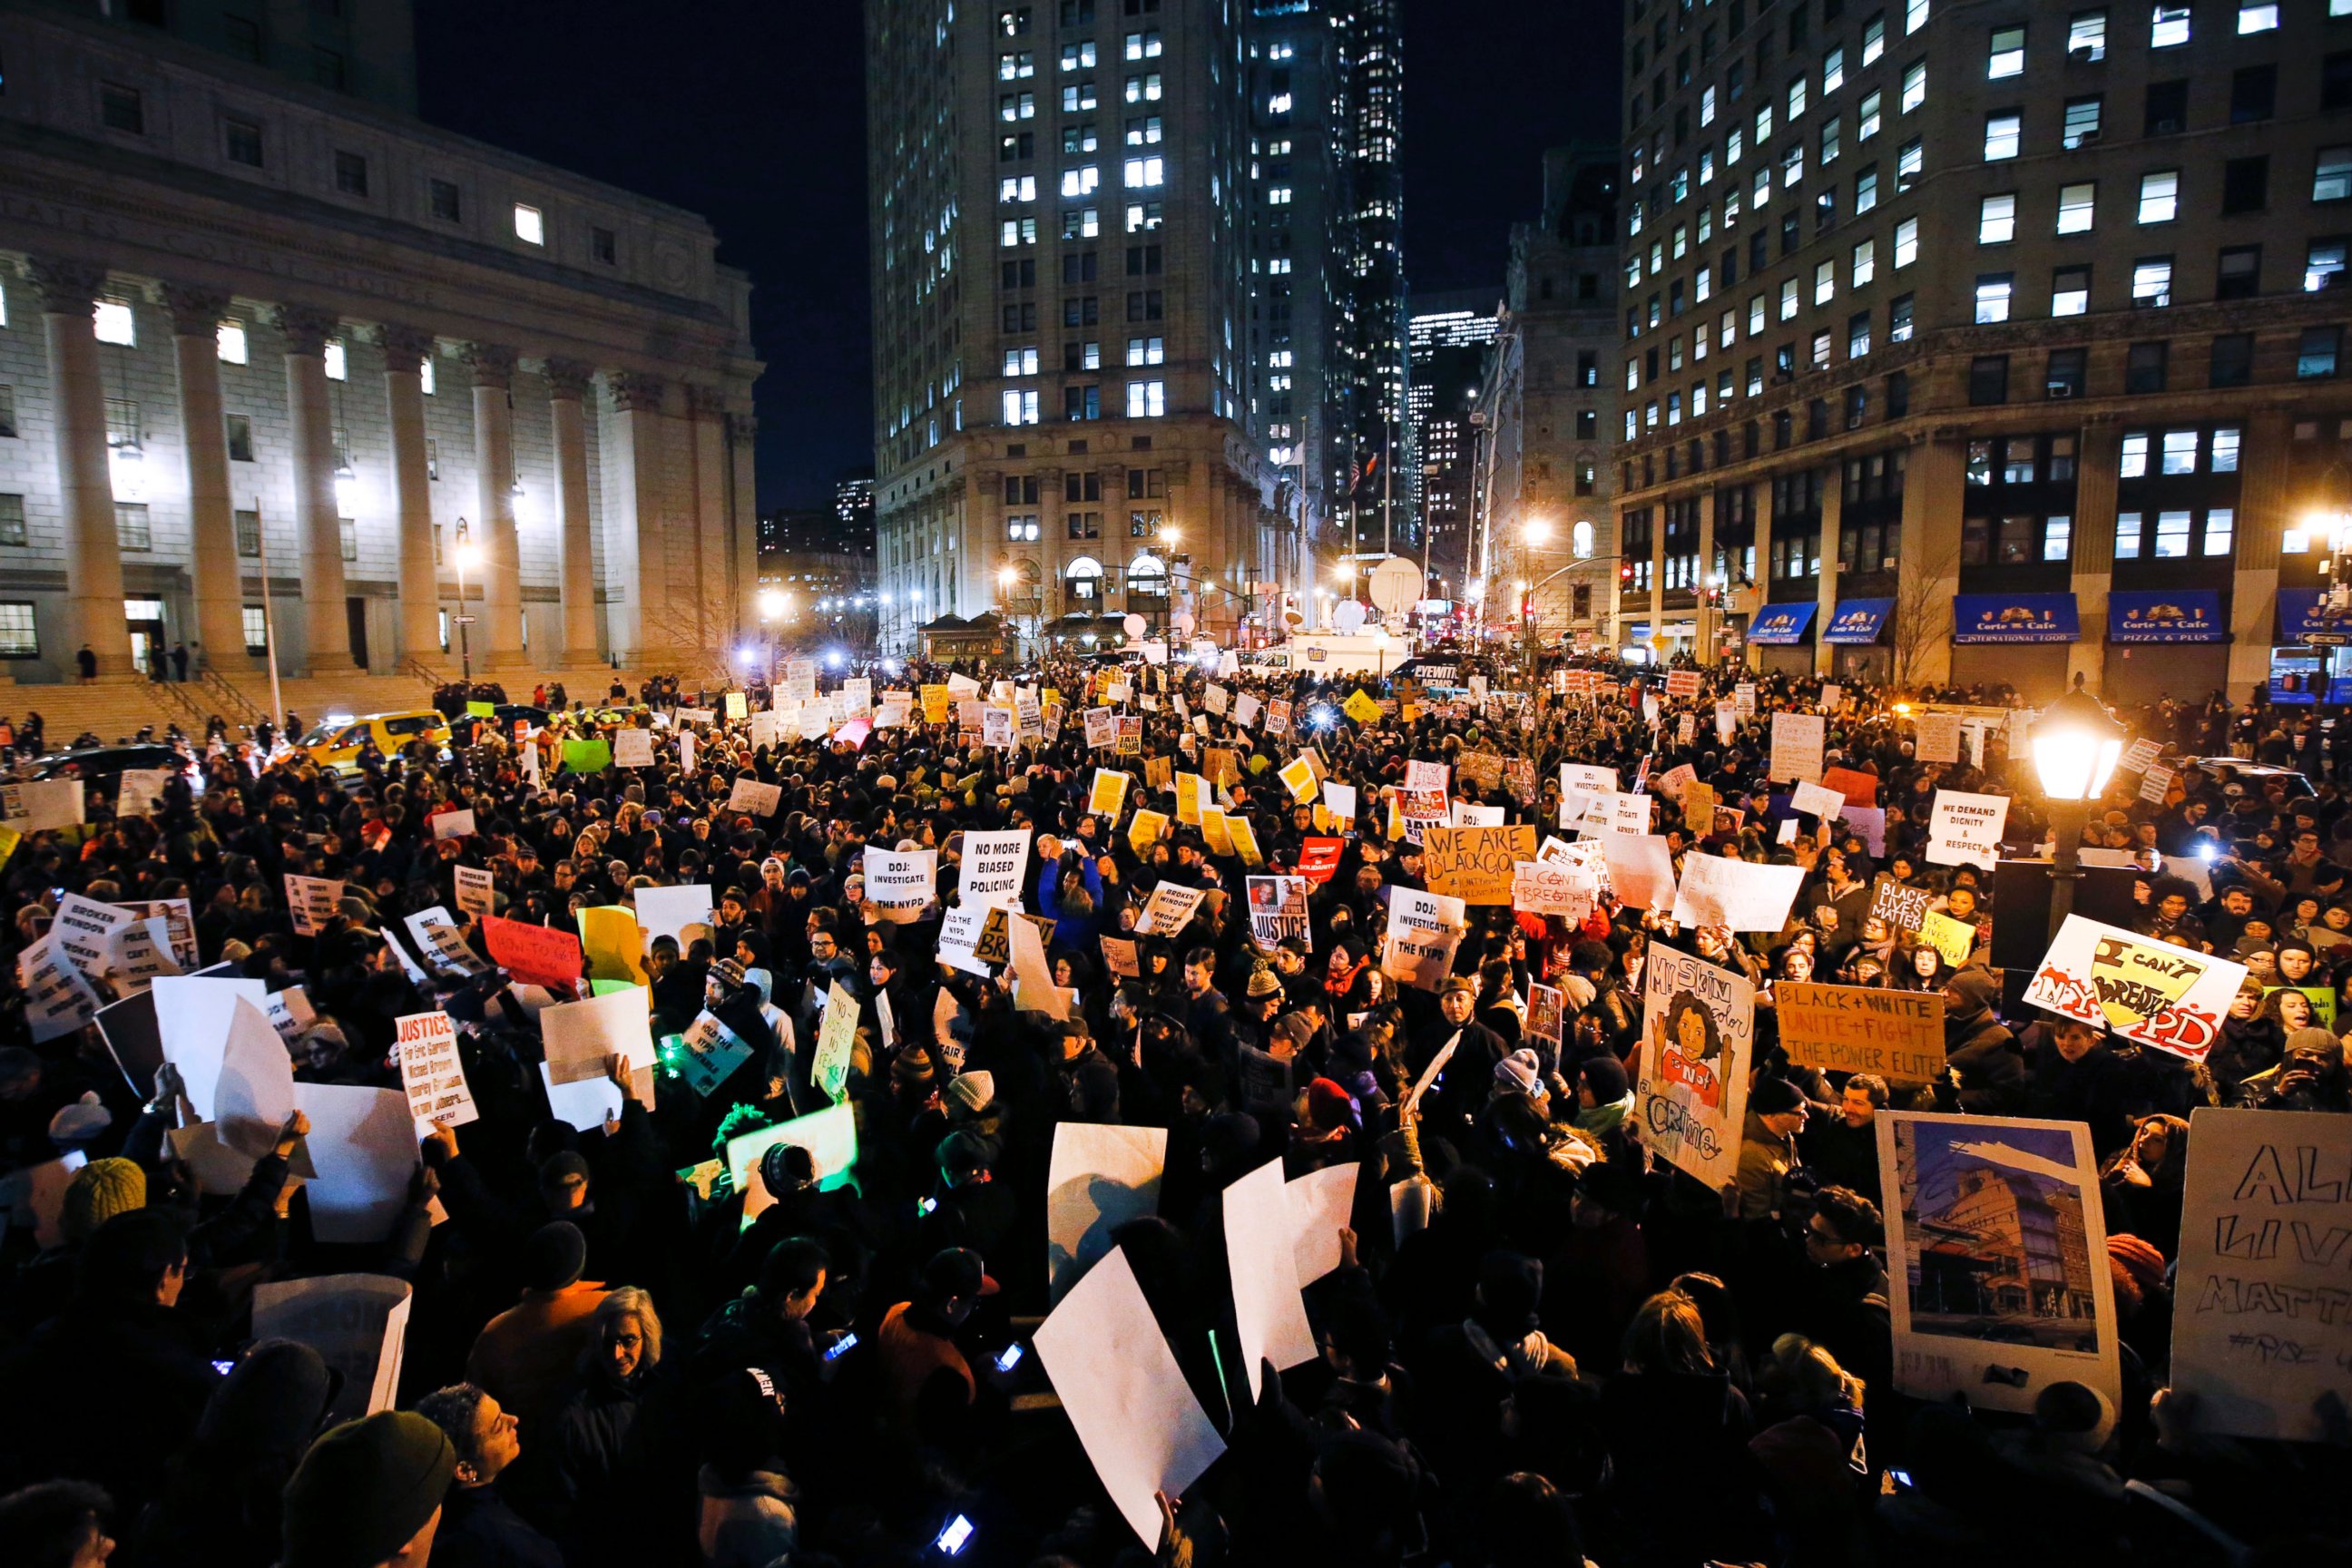 PHOTO: Protesters rally against a grand jury's decision not to indict the police officer involved in the death of Eric Garner in Foley Square, Dec. 4, 2014, in New York.